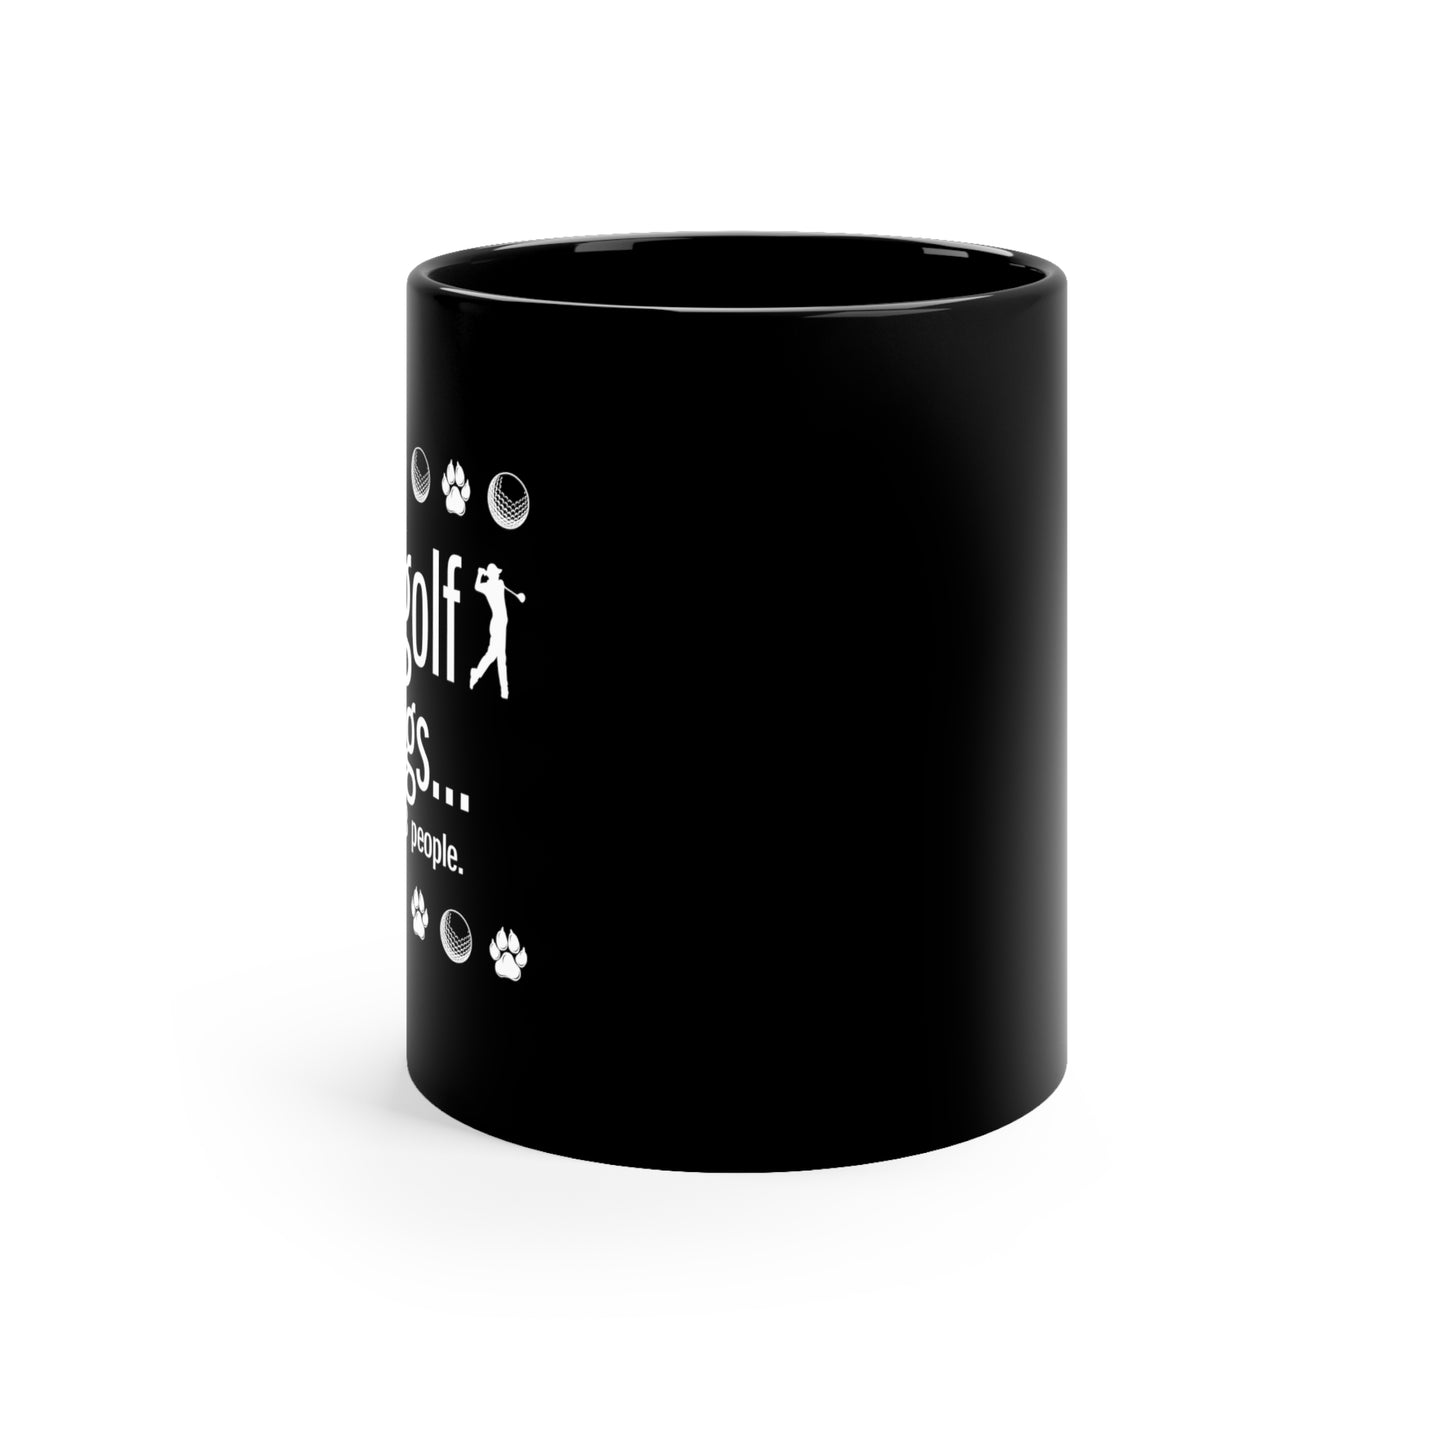 I like golf, dogs and maybe 3 people (This is so accurate) Black ceramic mug